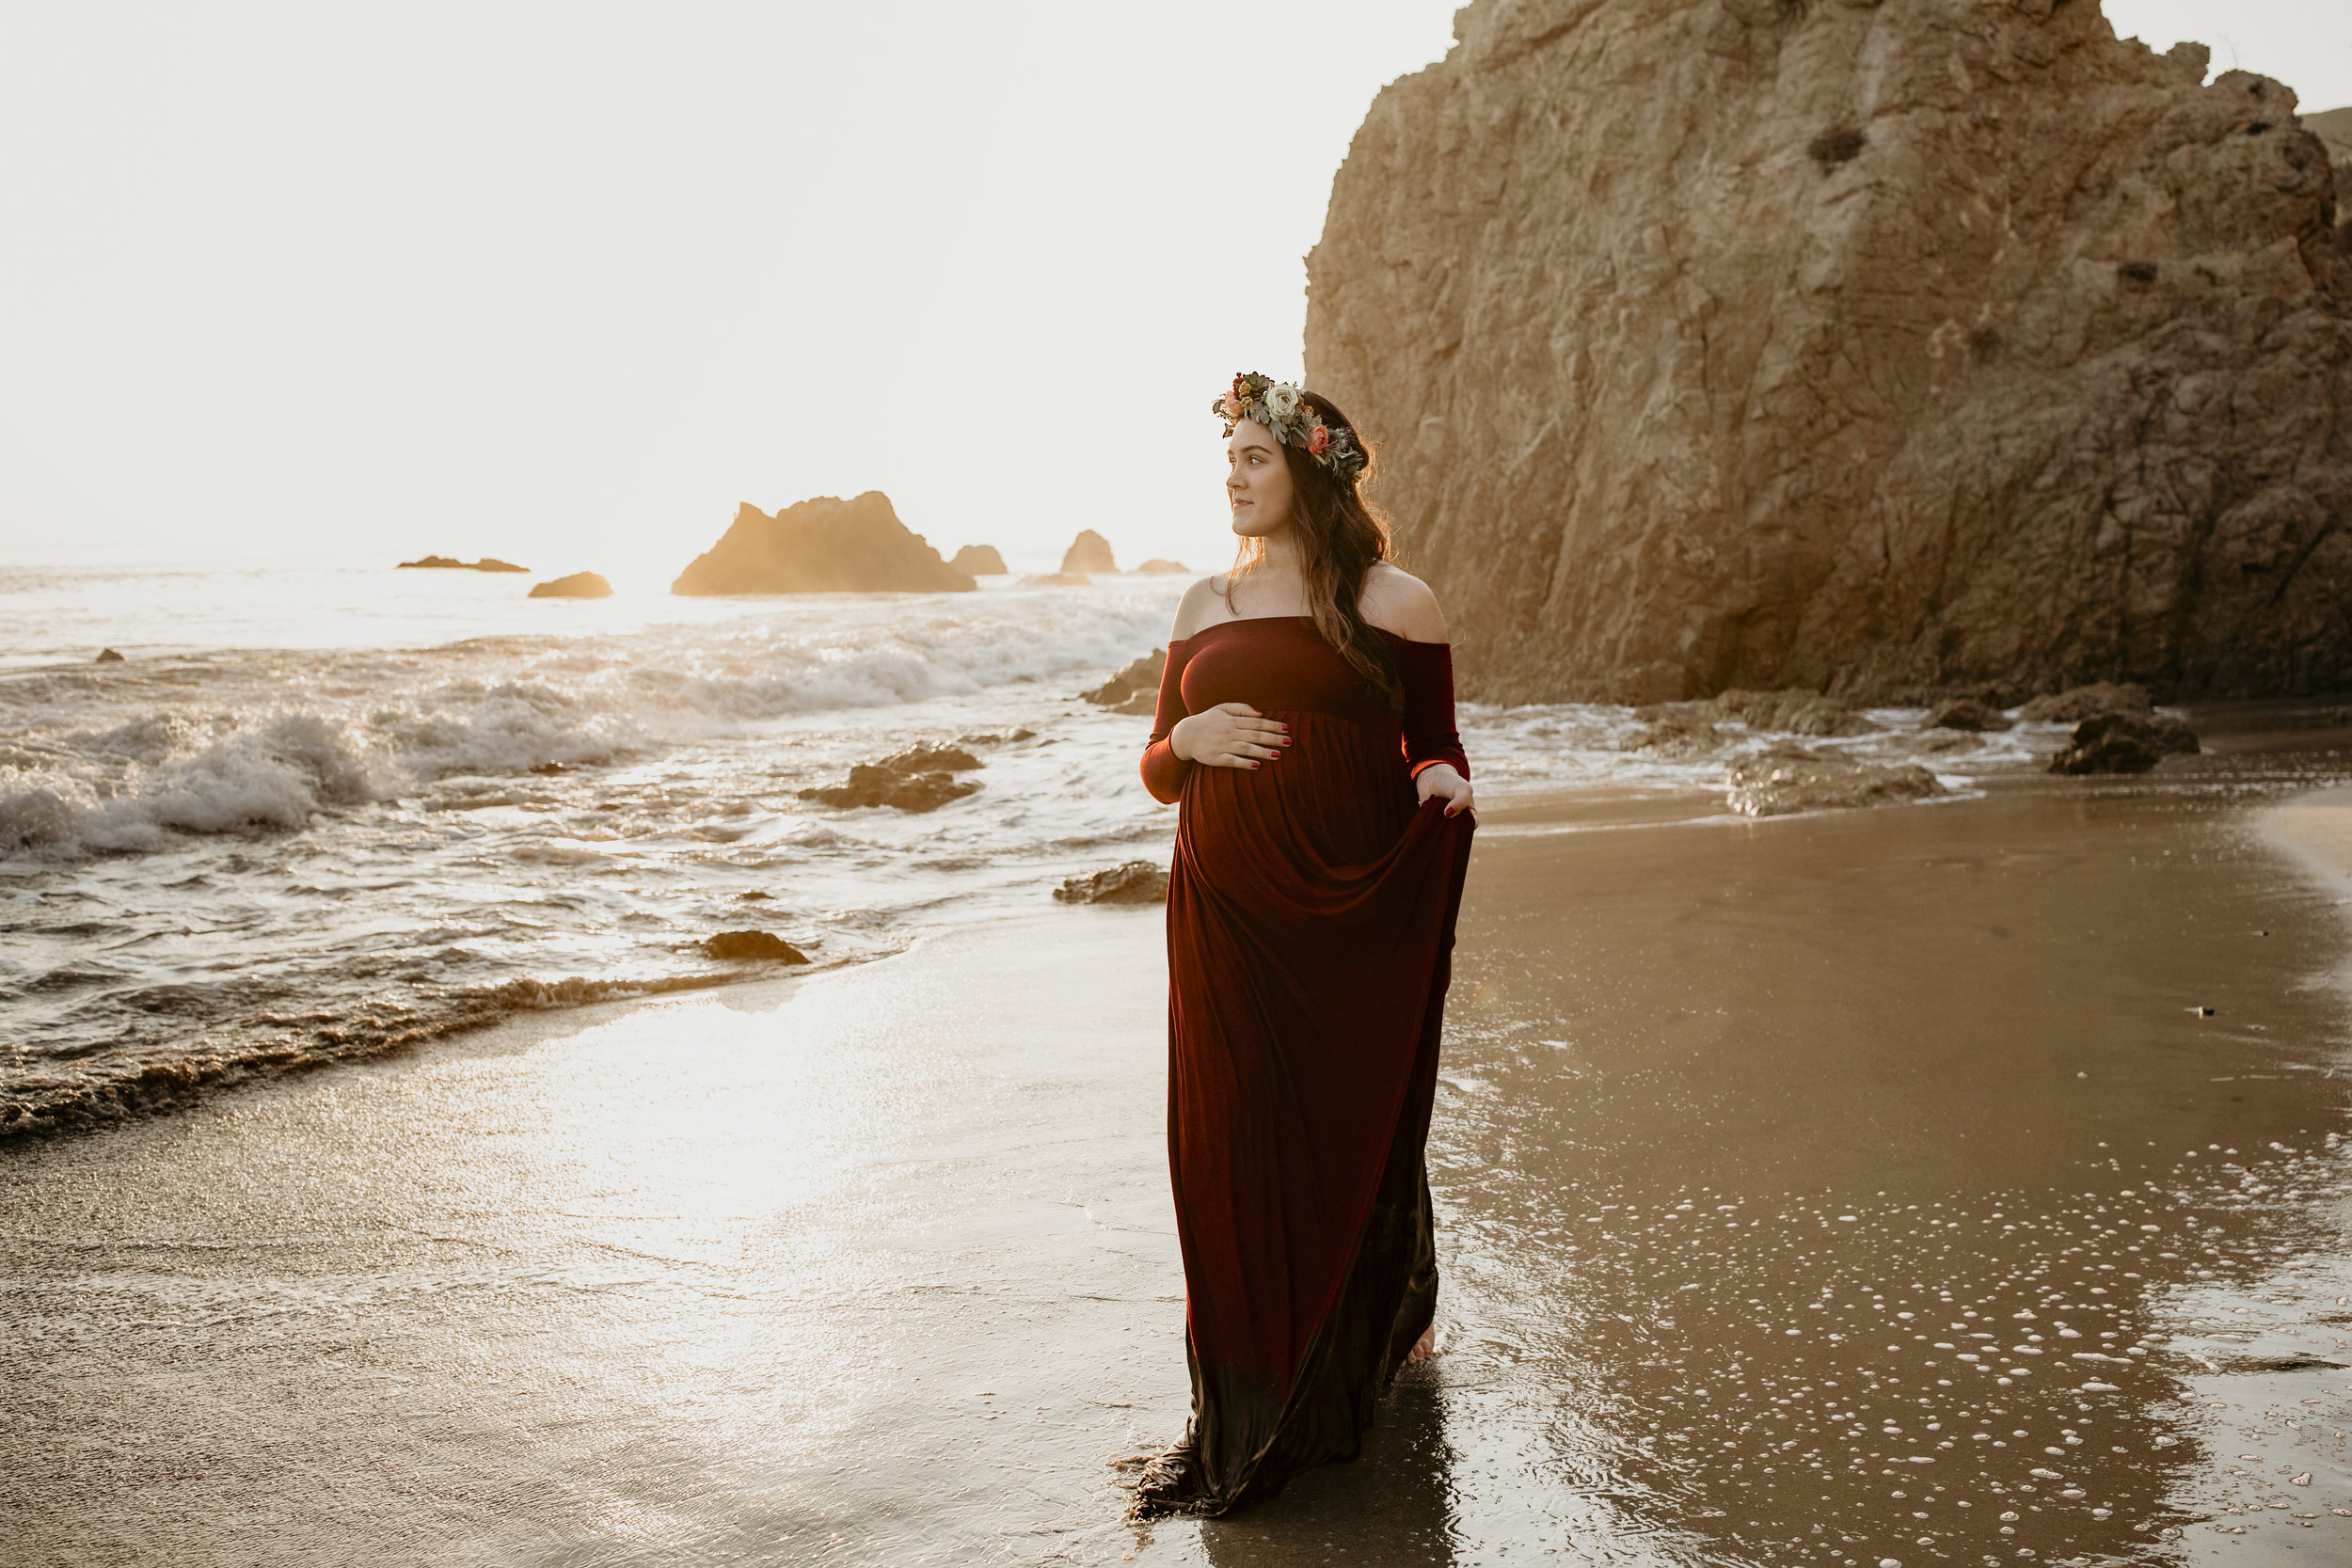 photographer bre thurston | san francisco bay area california | lifestyle maternity photography | outdoors on location beach mermaid flower crown and sunset shoot